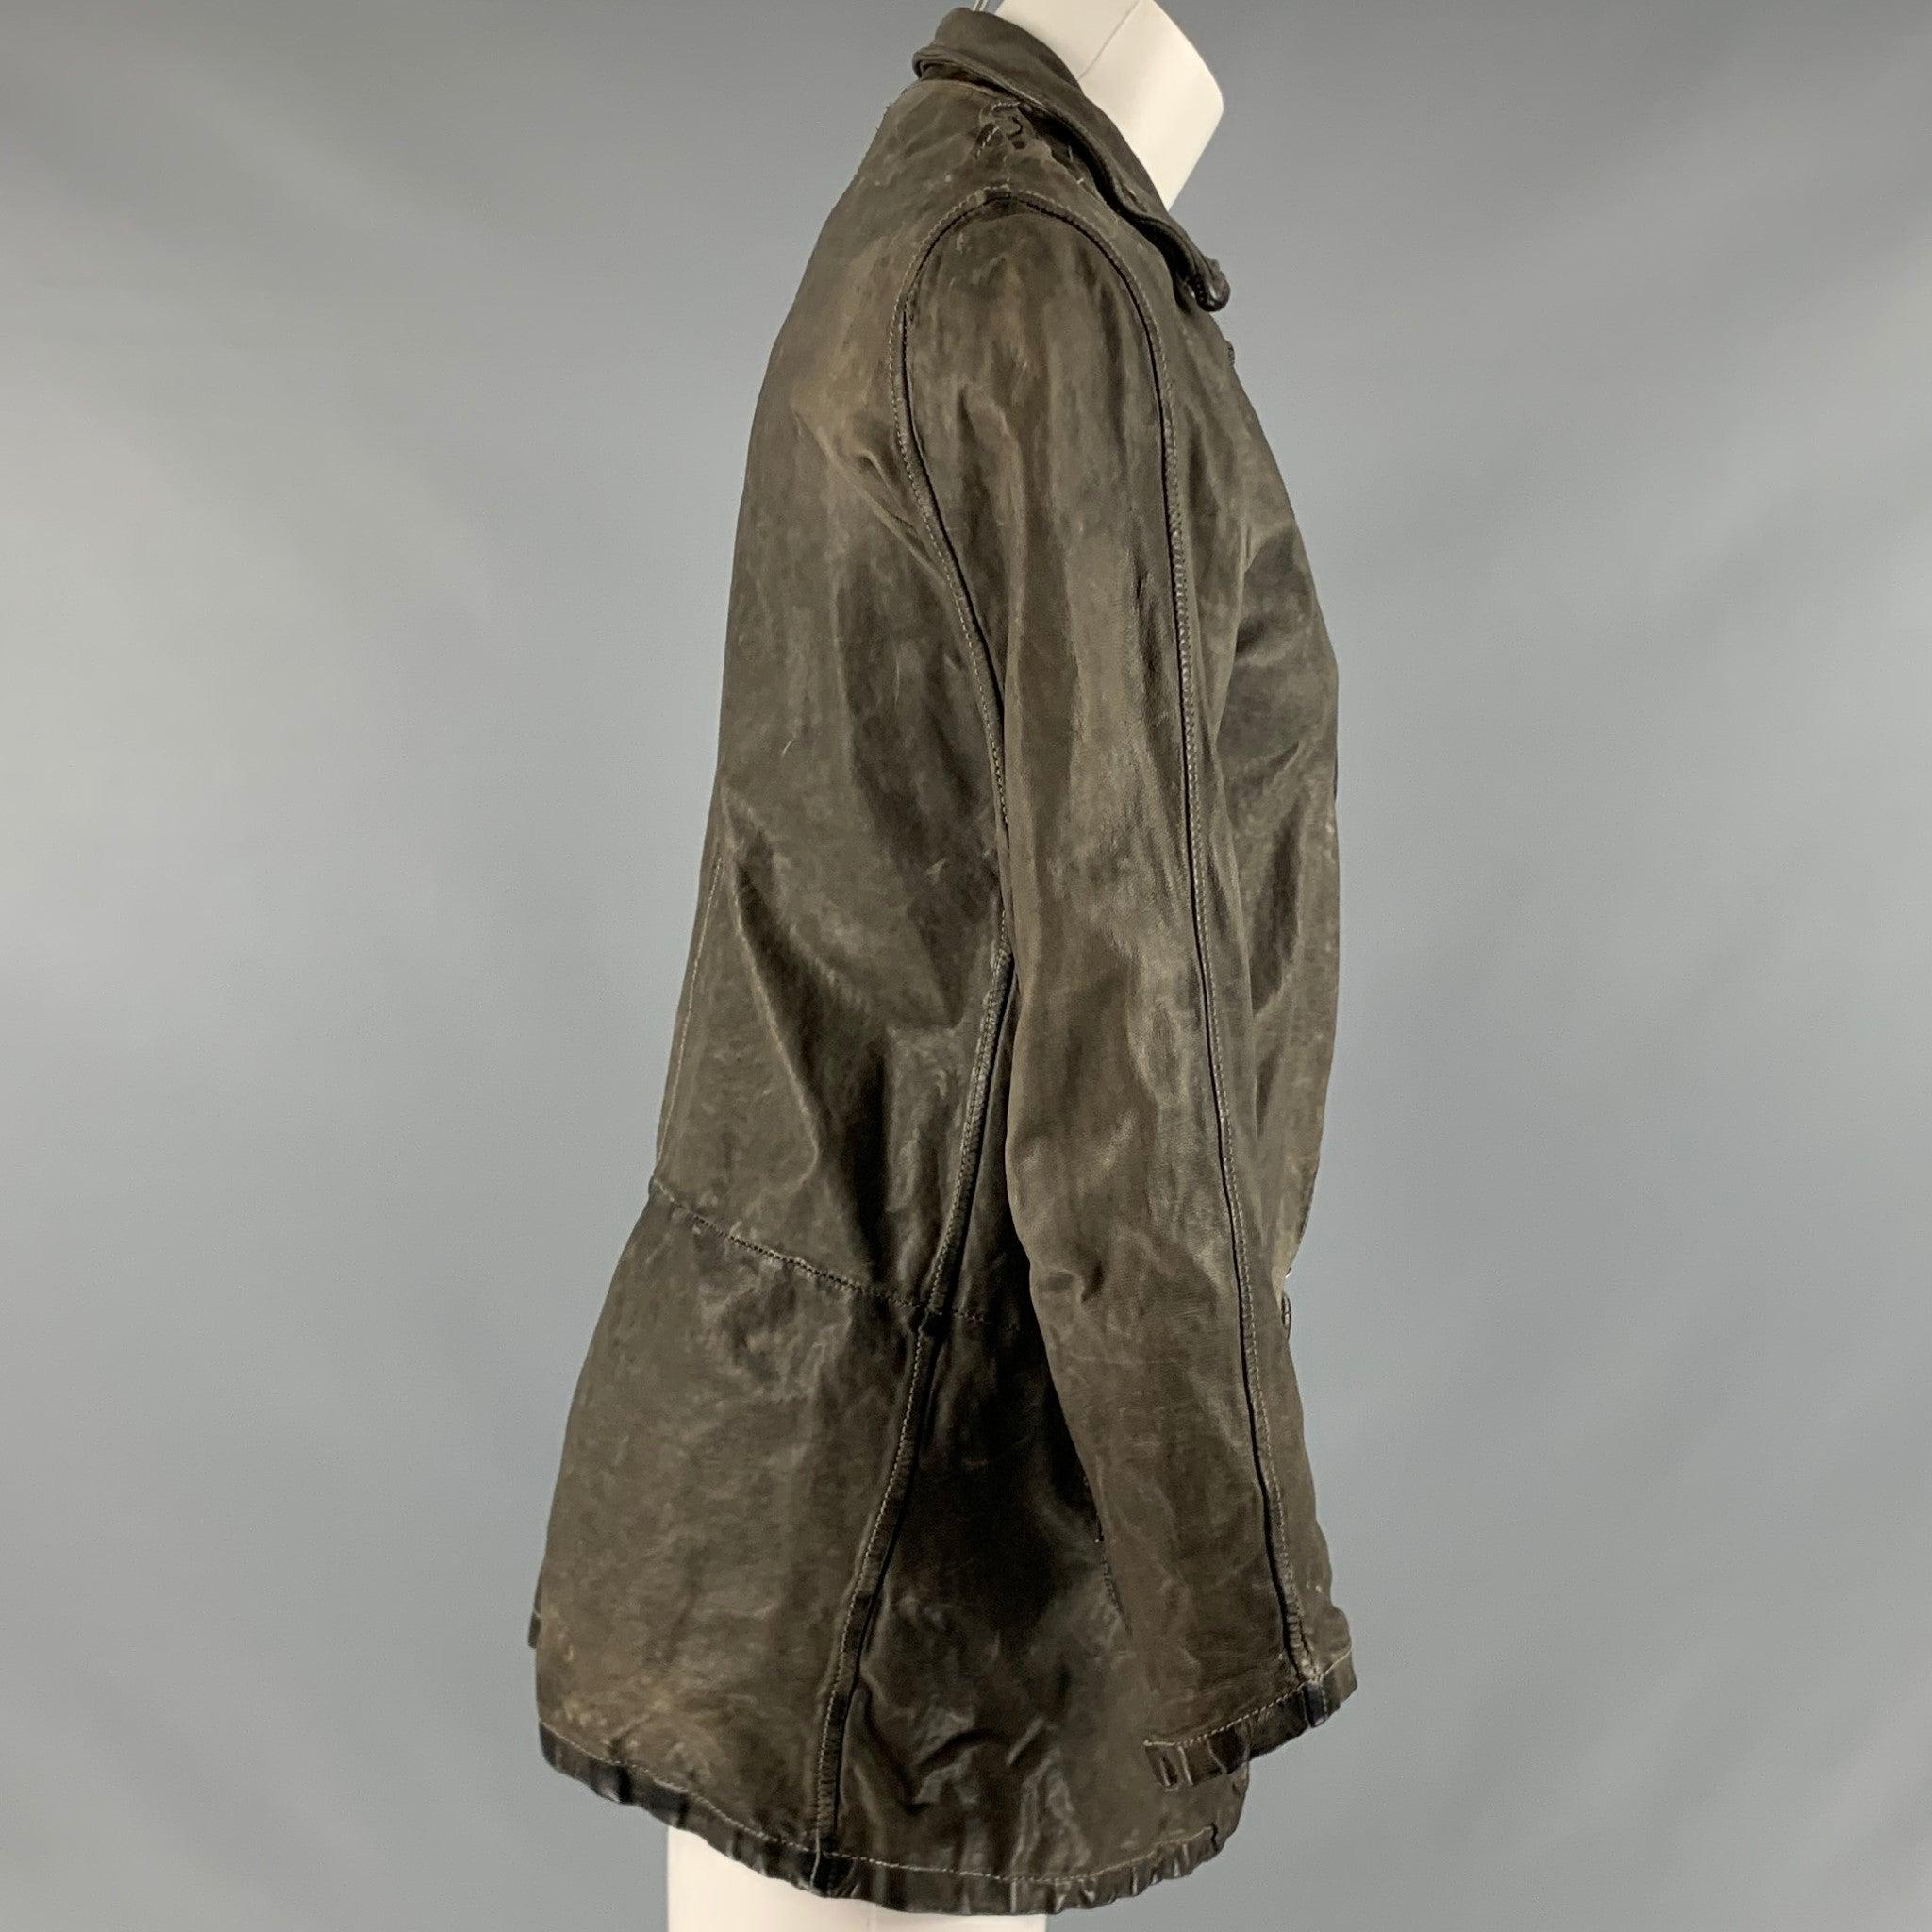 GIORGIO BRATO jacket
in a
grey vegetable tan leather featuring a distressed style, zipper pockets, and a zip up closure. Handmade in Italy.Excellent Pre-Owned Condition. 

Marked:   42 

Measurements: 
 
Shoulder: 15 inches Bust: 32 inches Sleeve: